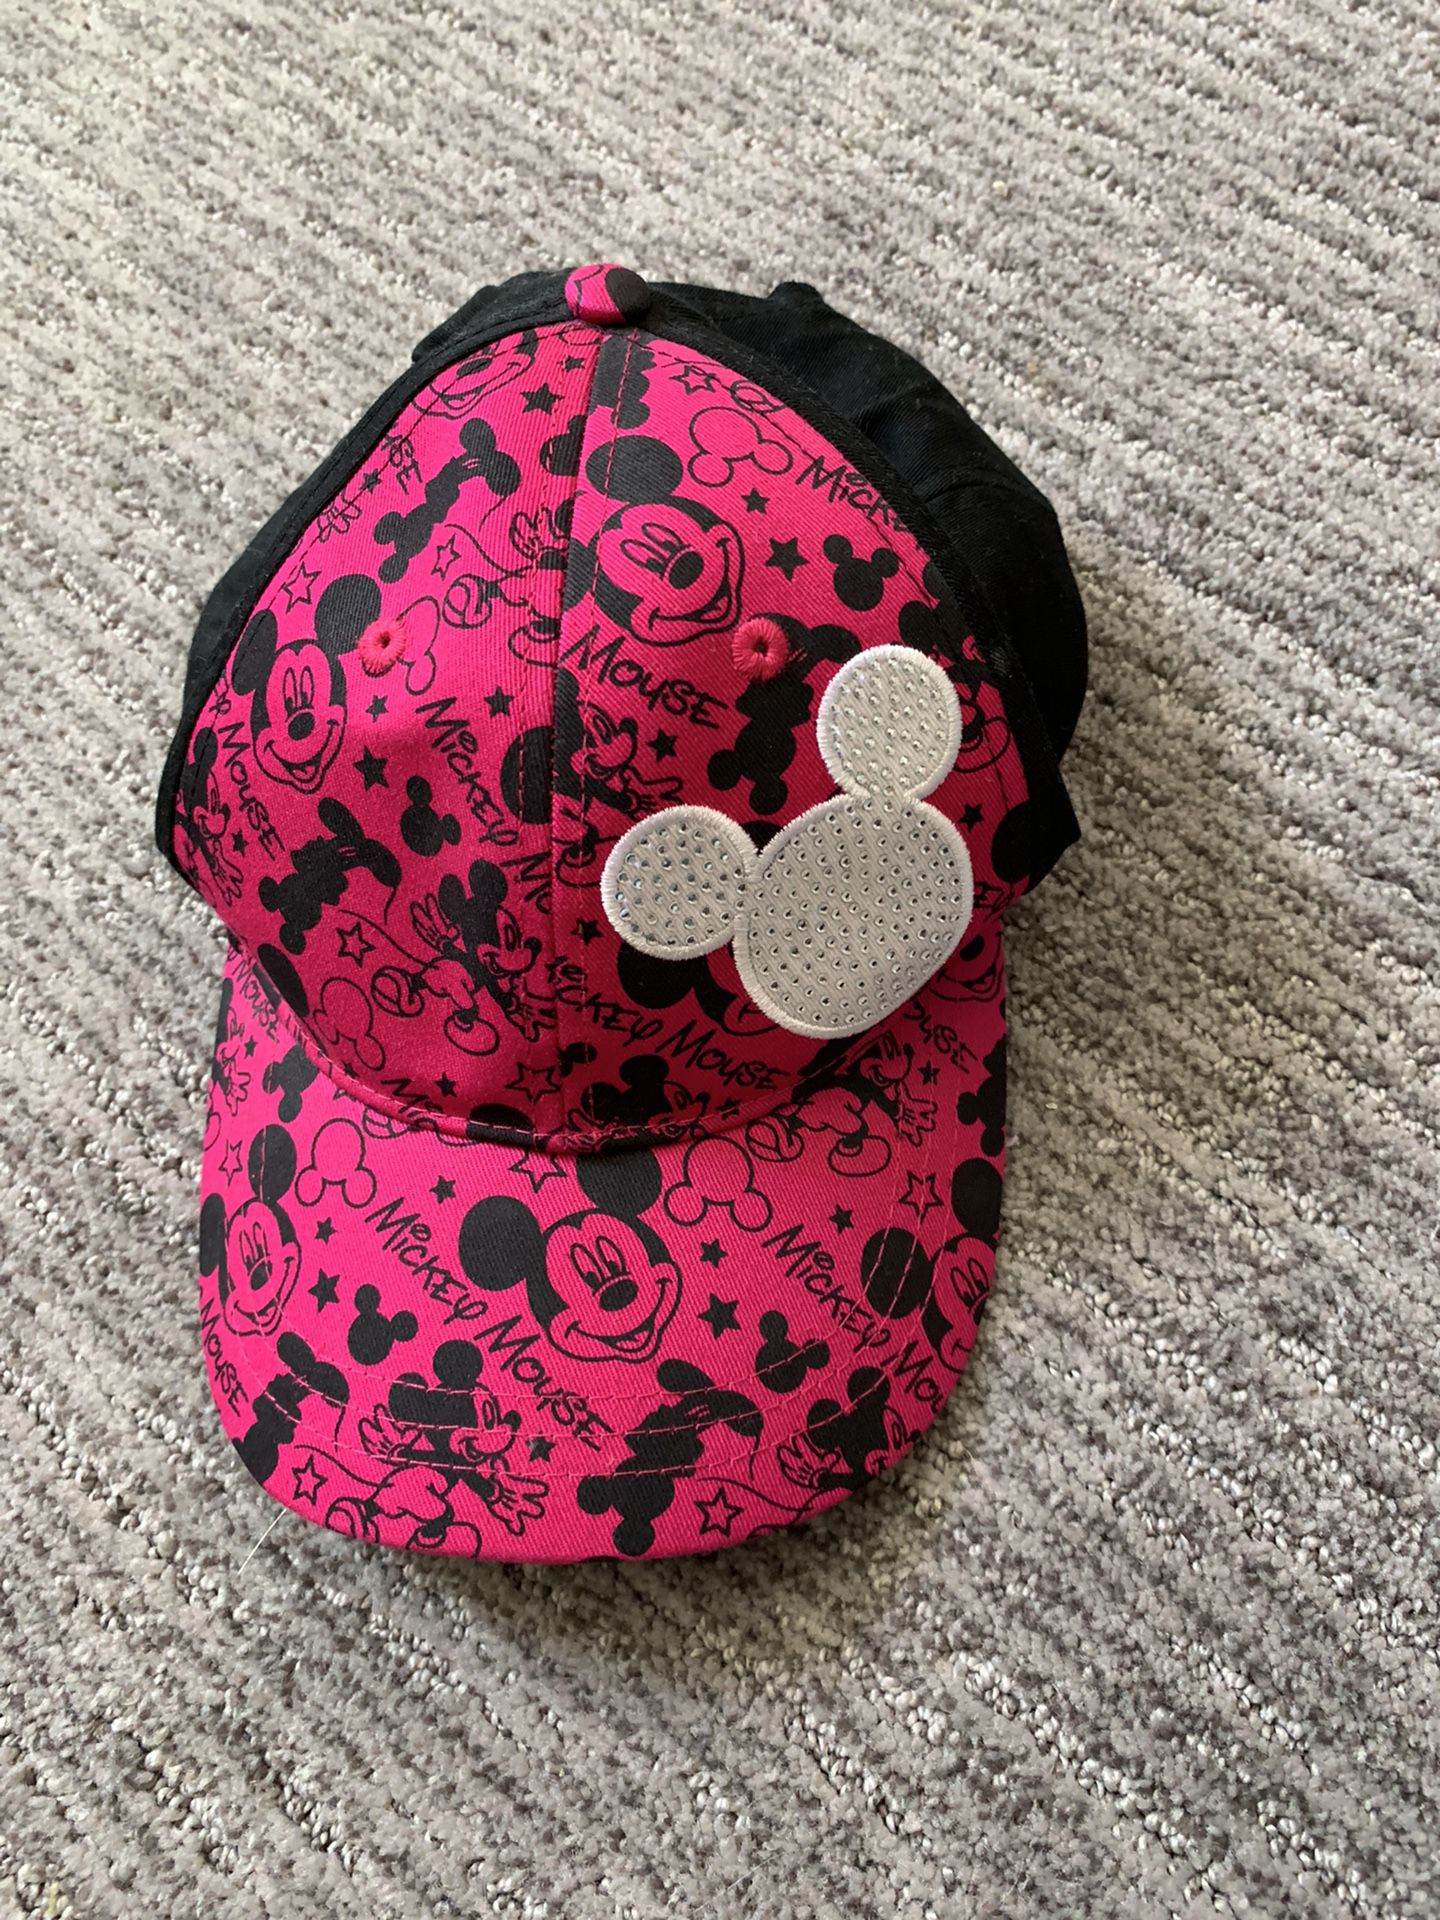 Disney Mickey Mouse Hat $8